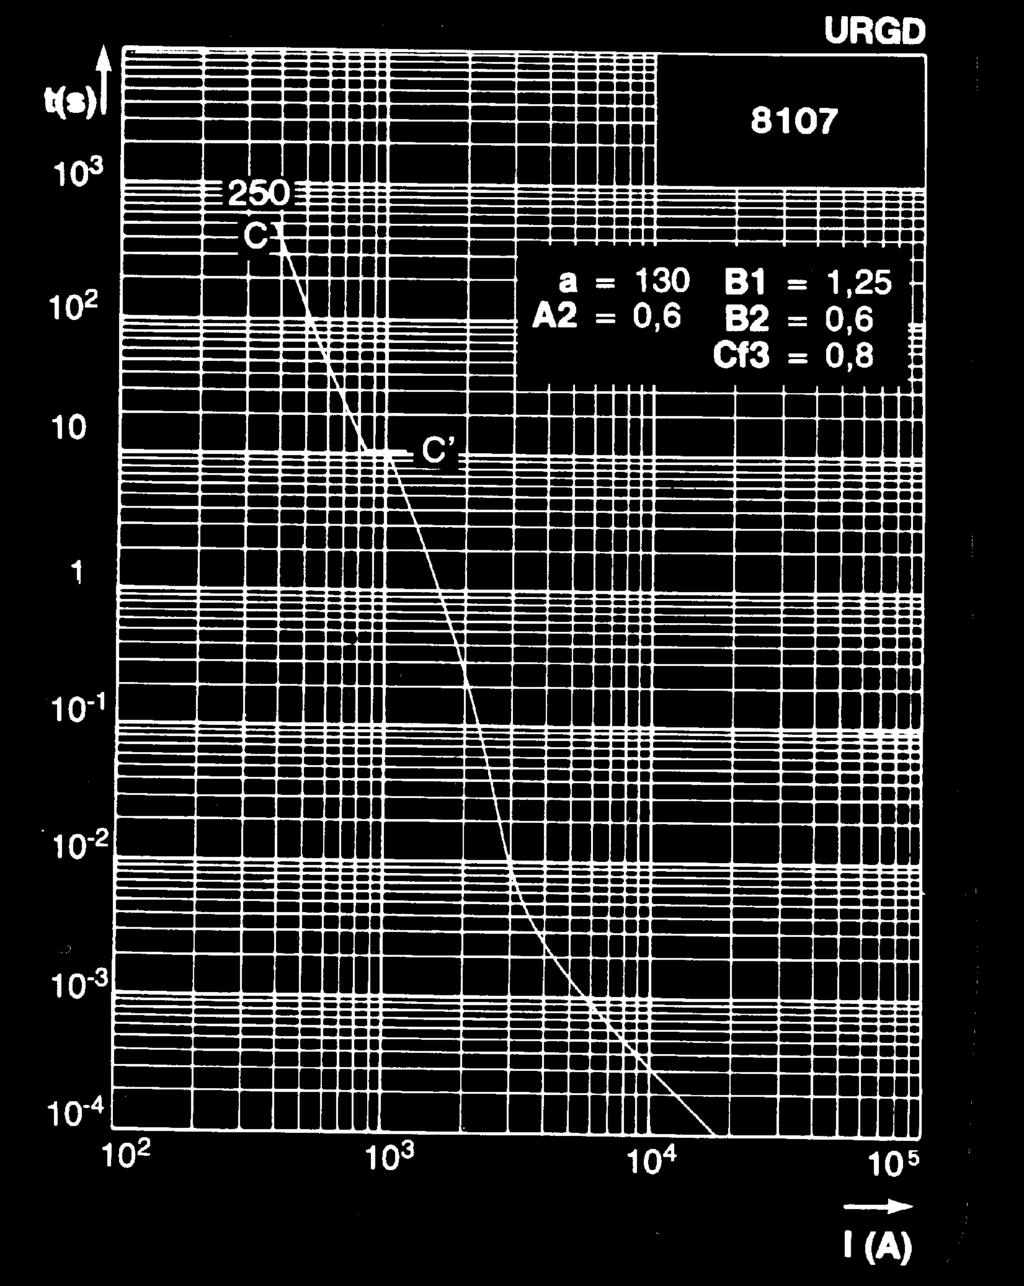 Left: Mean curves showing variation of total clearing time (I 2 t t ) and the total clearing duration tt as a function of the ope voltage U.